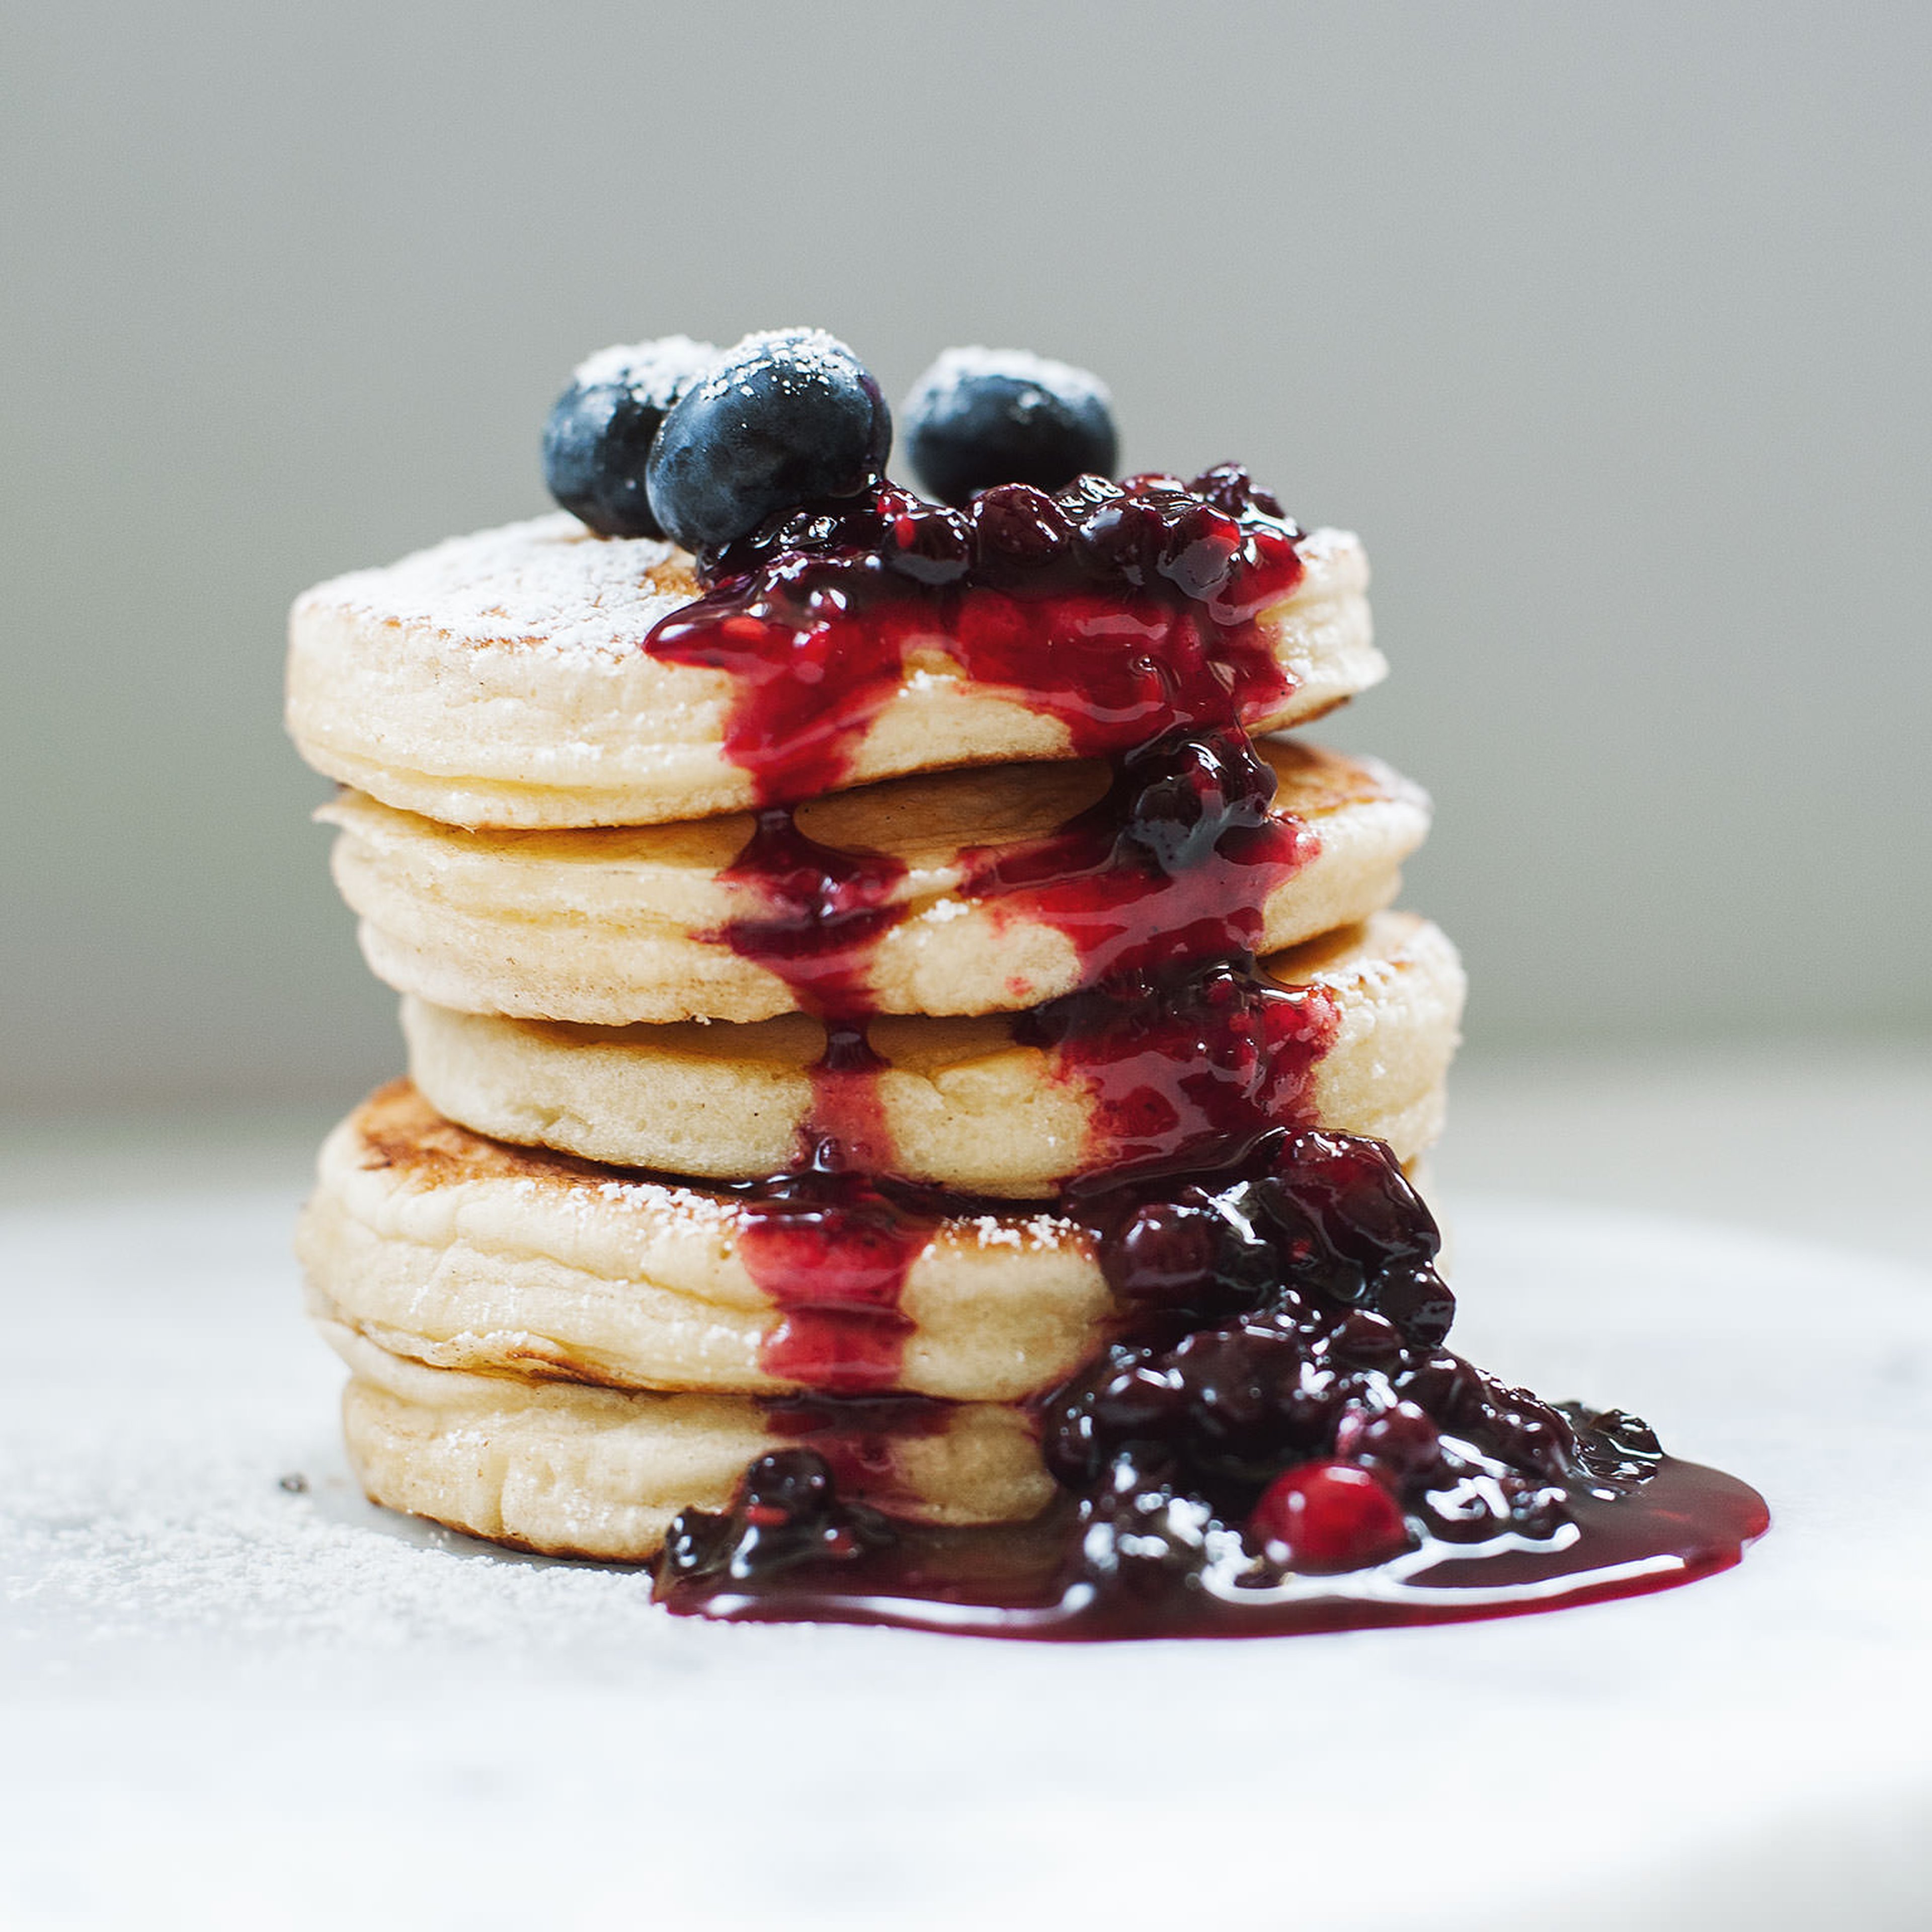 3 Reasons to Make Pancakes in the Morning